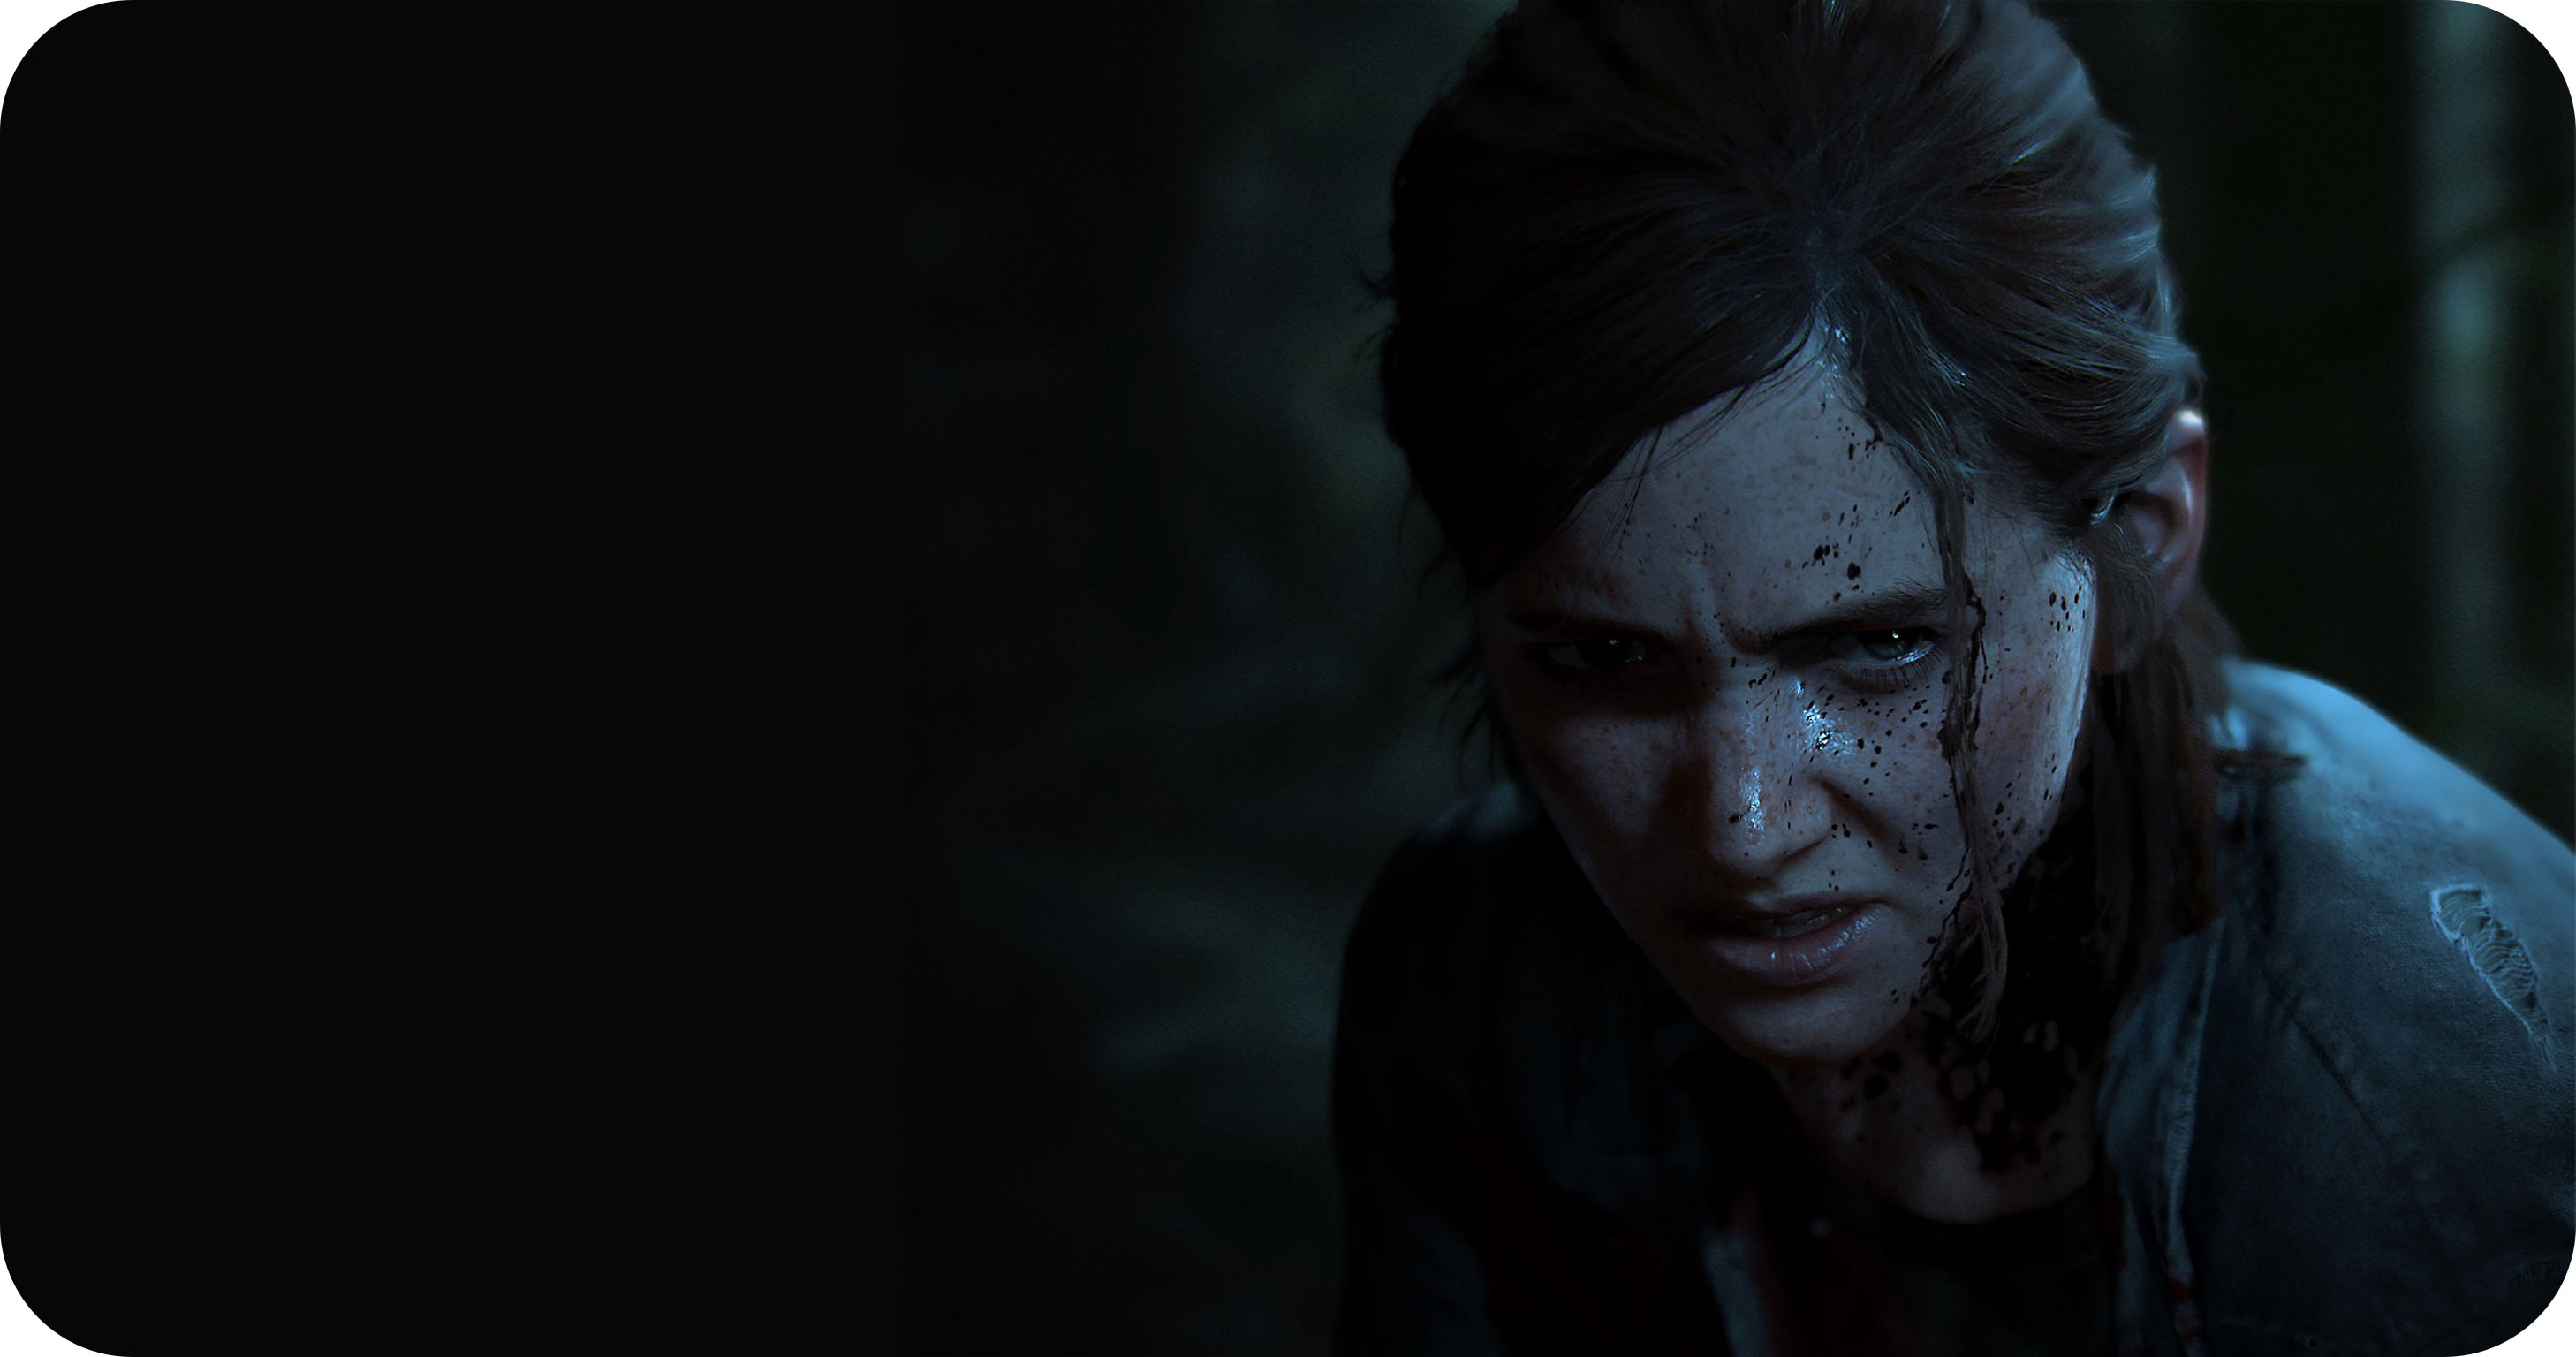 download the last of us remake ps4